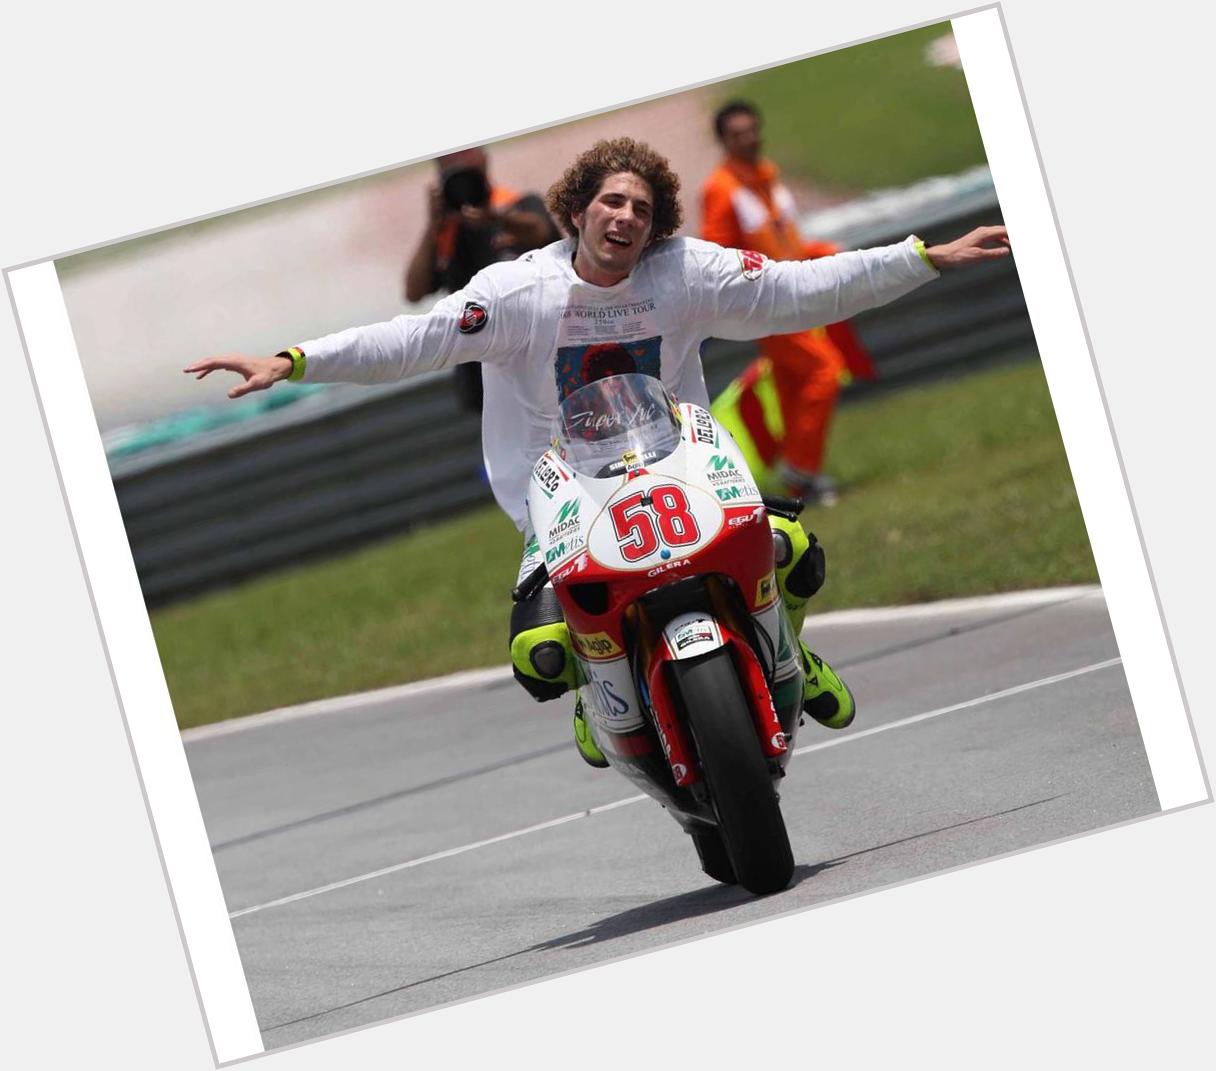 Happy birthday Marco Simoncelli, you will never be forgotten  